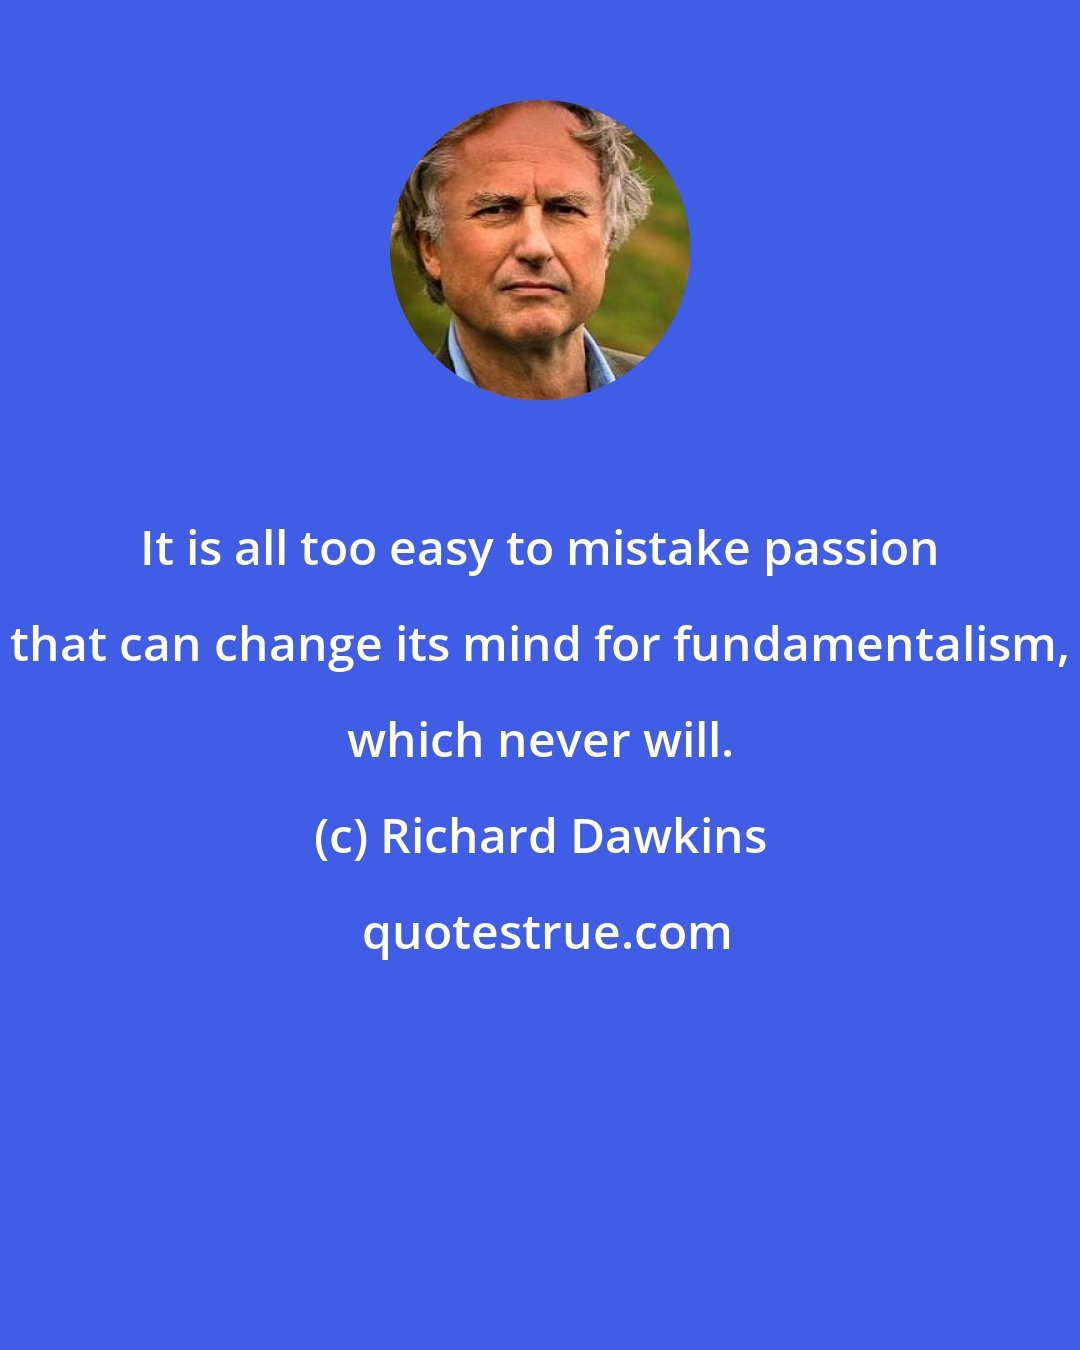 Richard Dawkins: It is all too easy to mistake passion that can change its mind for fundamentalism, which never will.